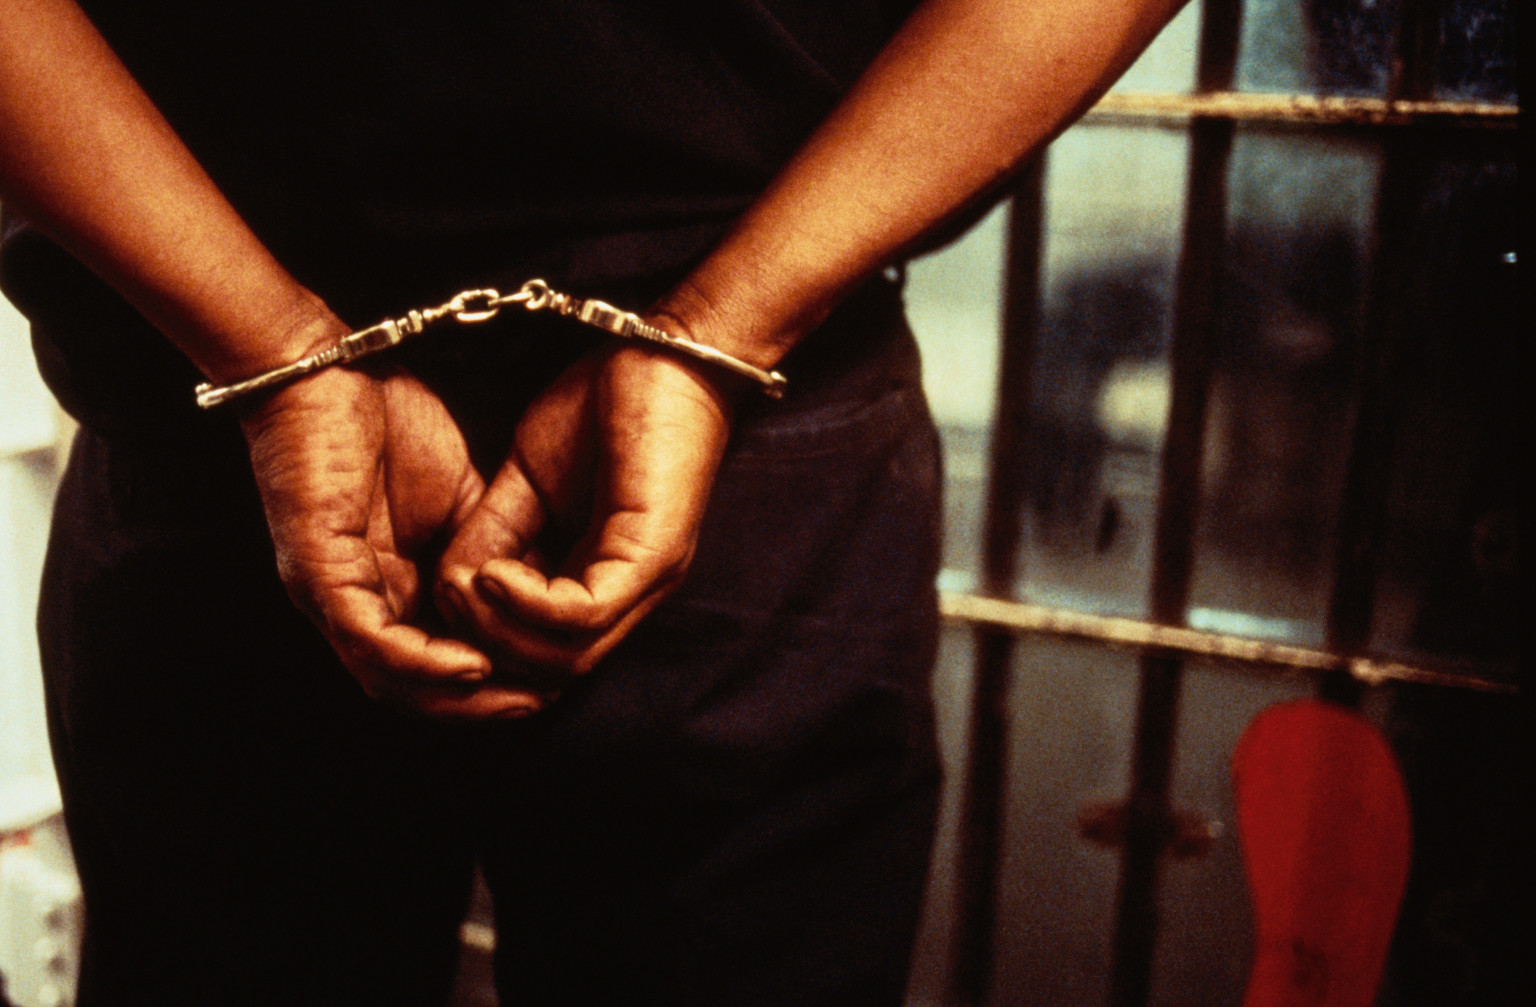 Man arrested for alleged rape of pregnant woman 